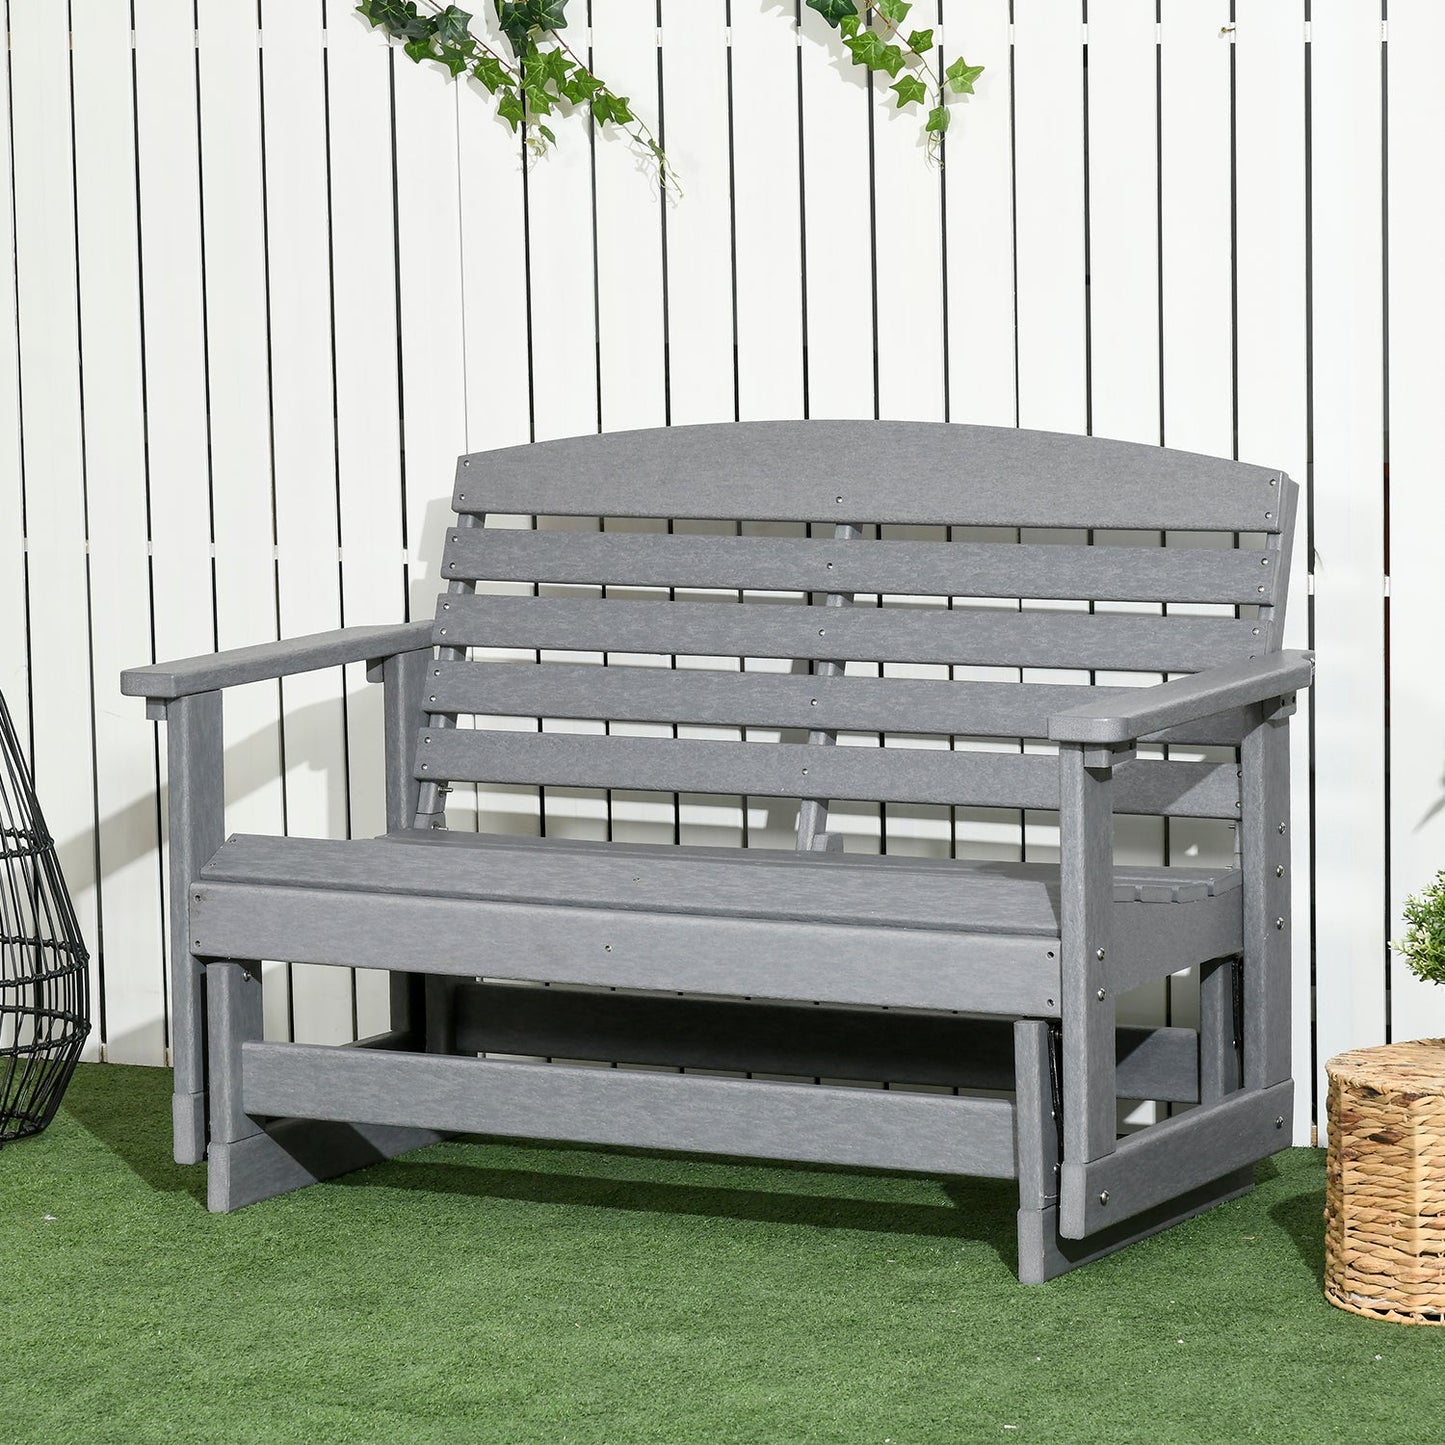 -Outsunny 2-Person Outdoor Glider Bench Patio Double Swing Rocking Chair Loveseat w/ Slatted HDPE Frame for Backyard Garden Porch, Light Gray - Outdoor Style Company